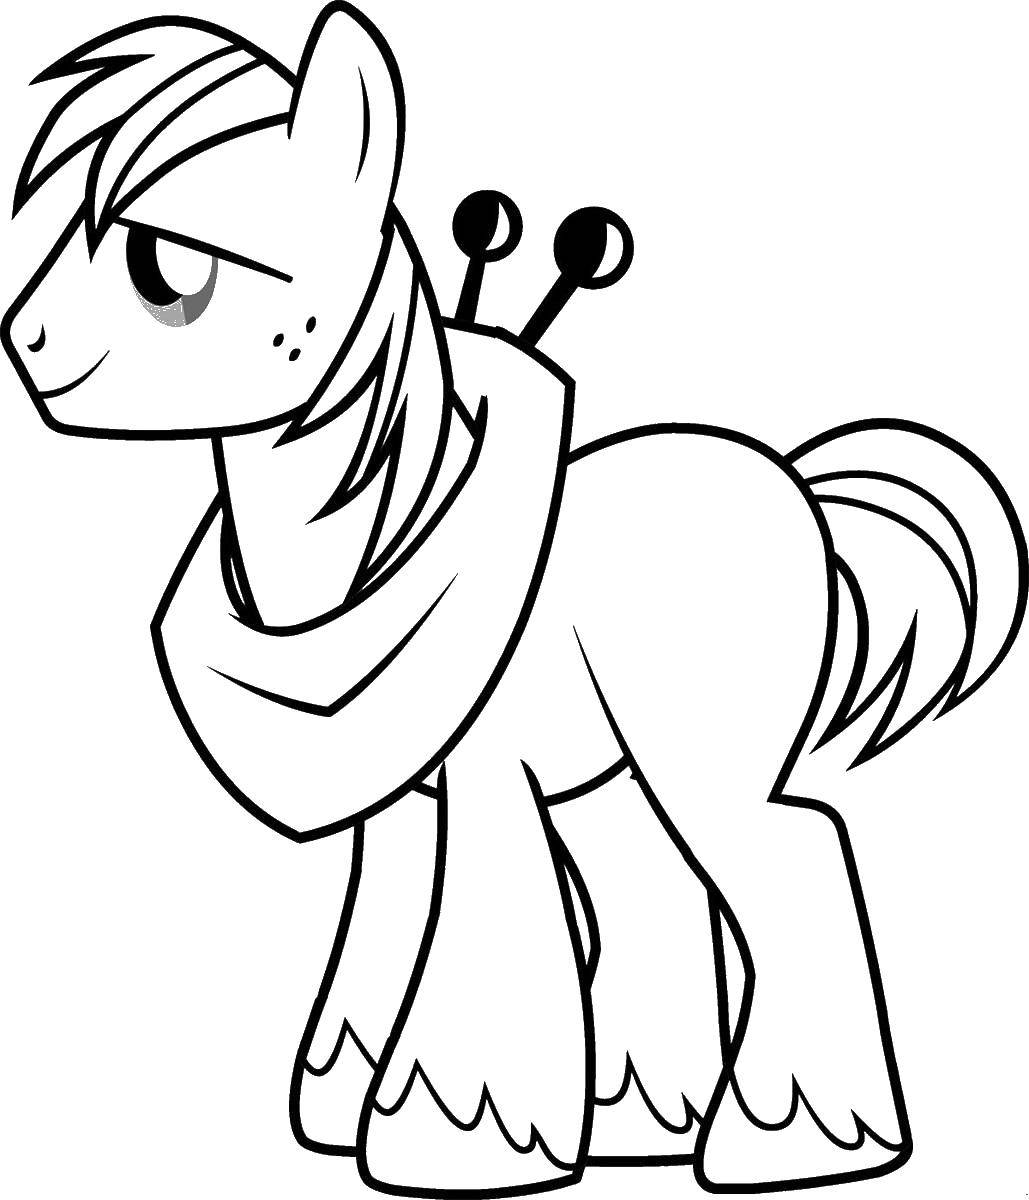 Coloring The brother of Apple Jack. Category Ponies. Tags:  Apple Jack, pony.